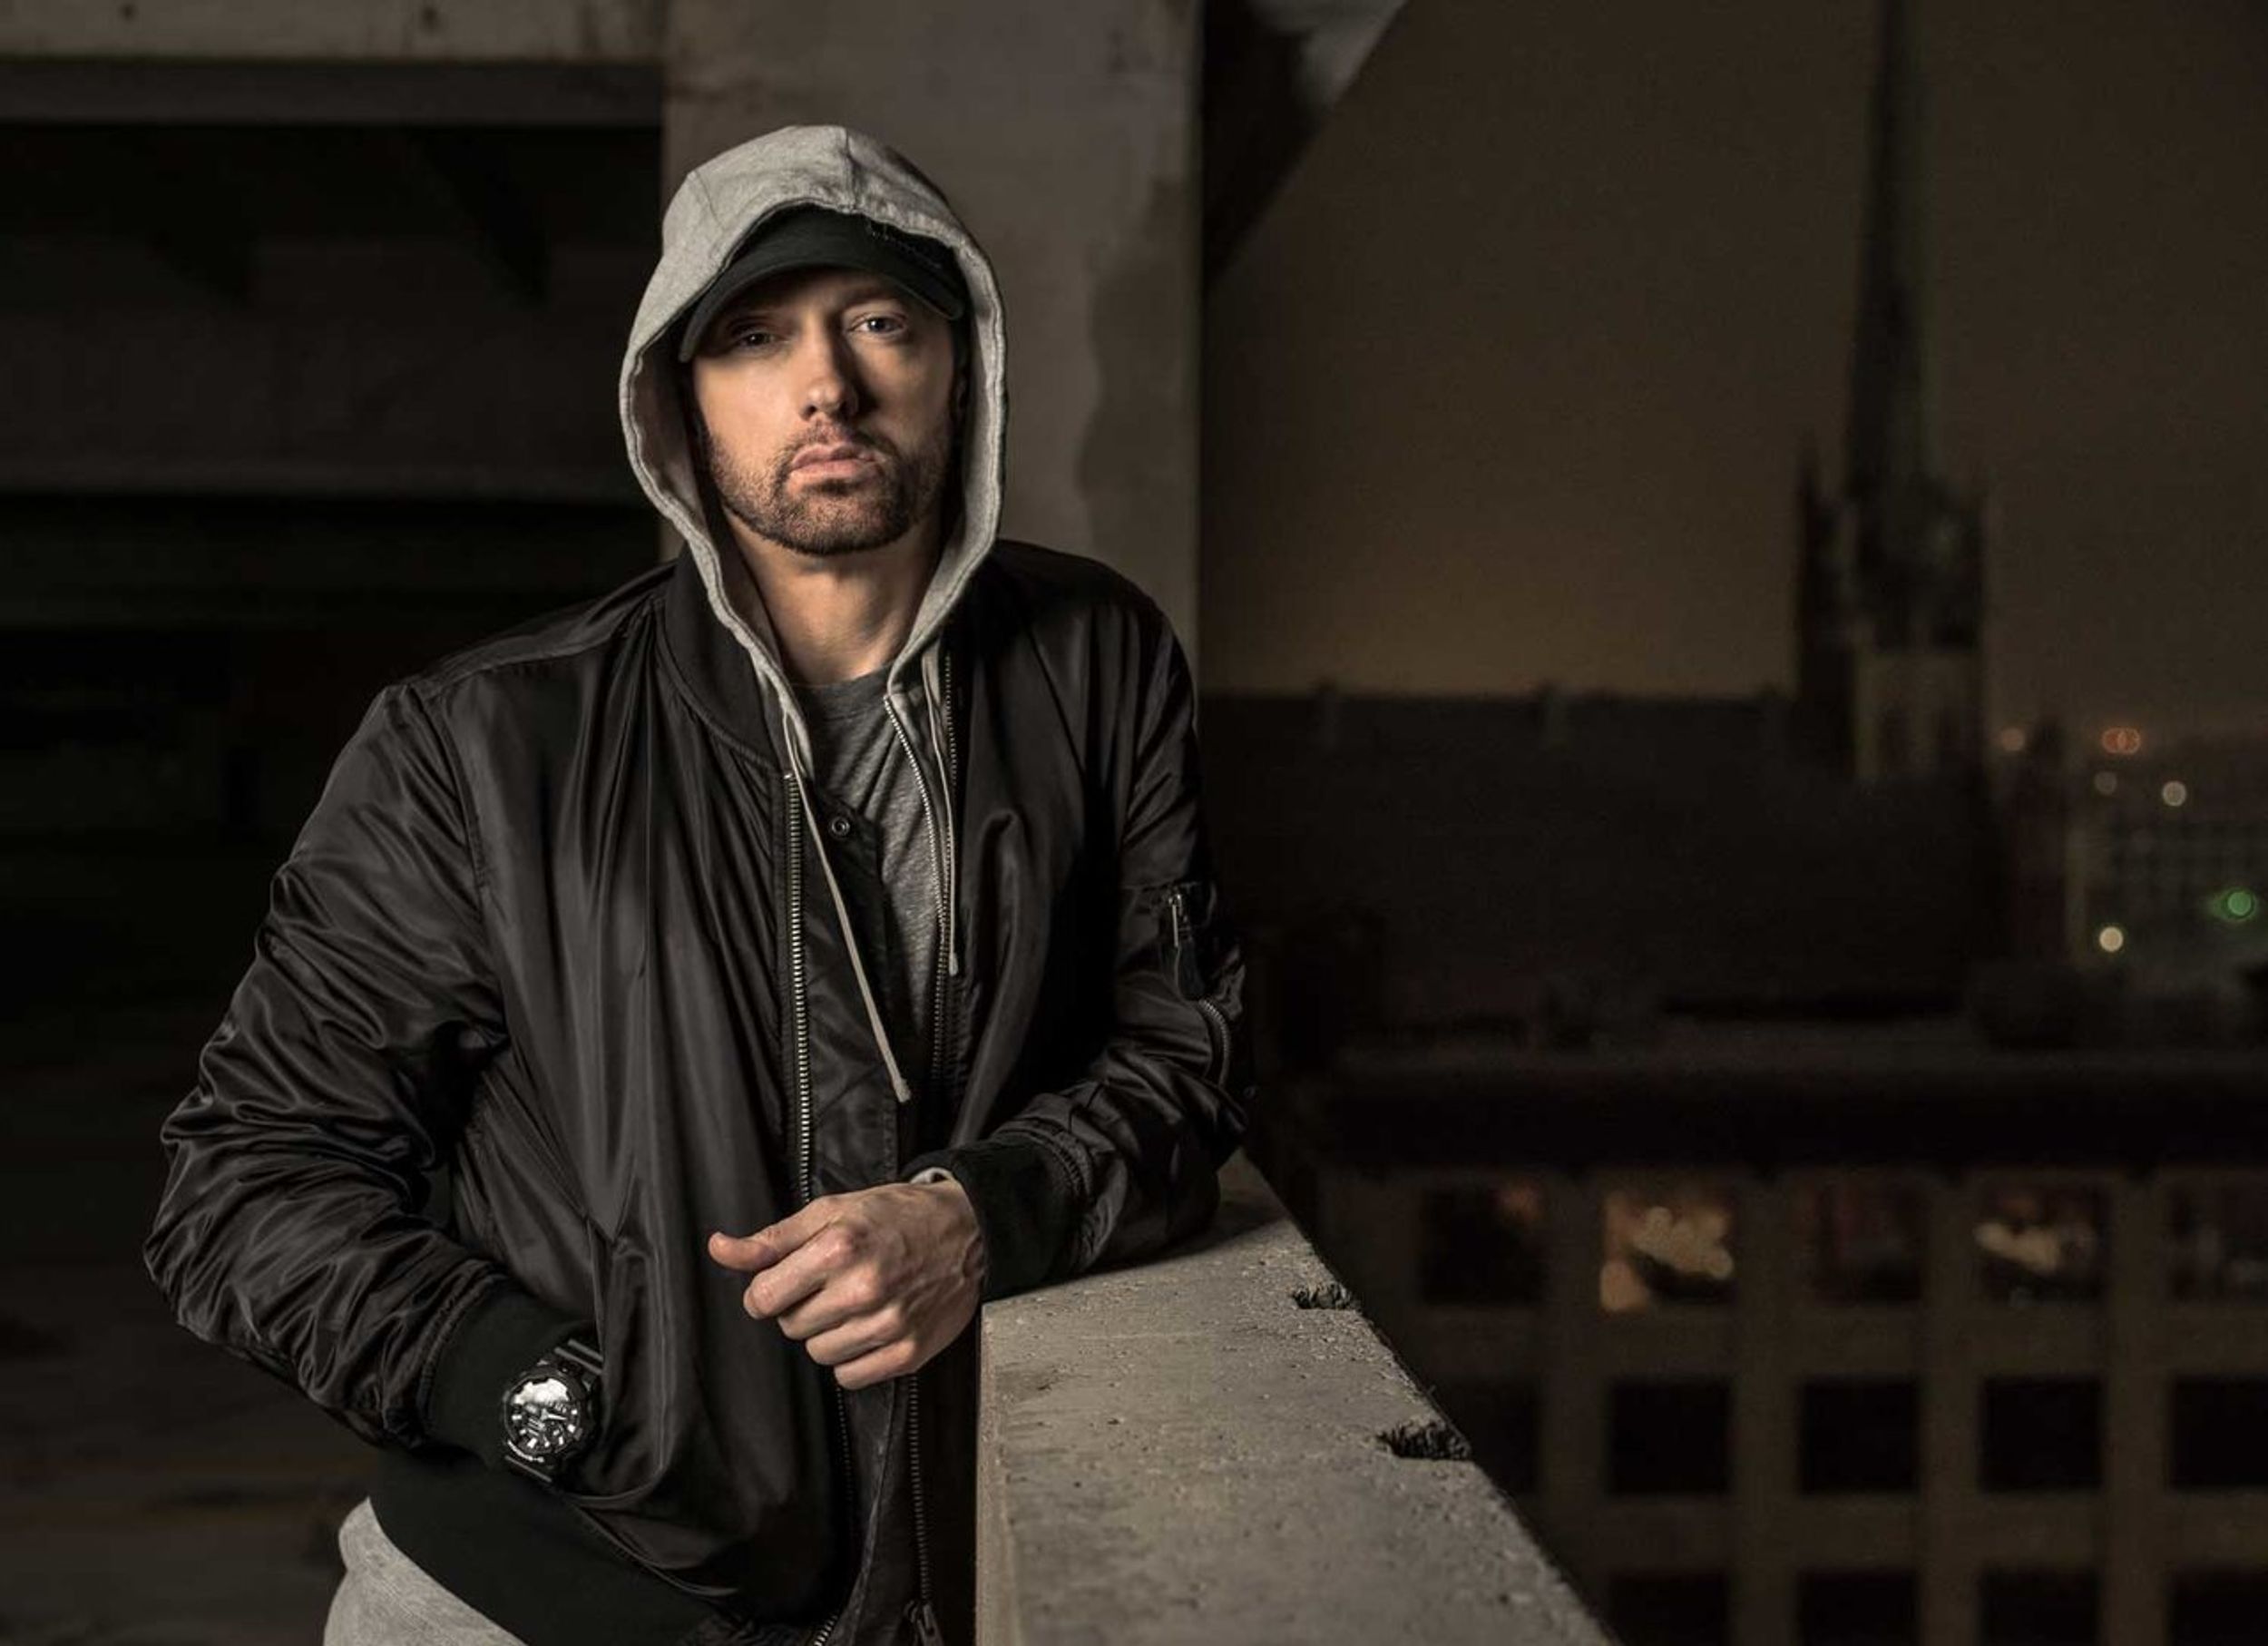 The Value Behind Eminem's Most Shocking Song, "Kim"